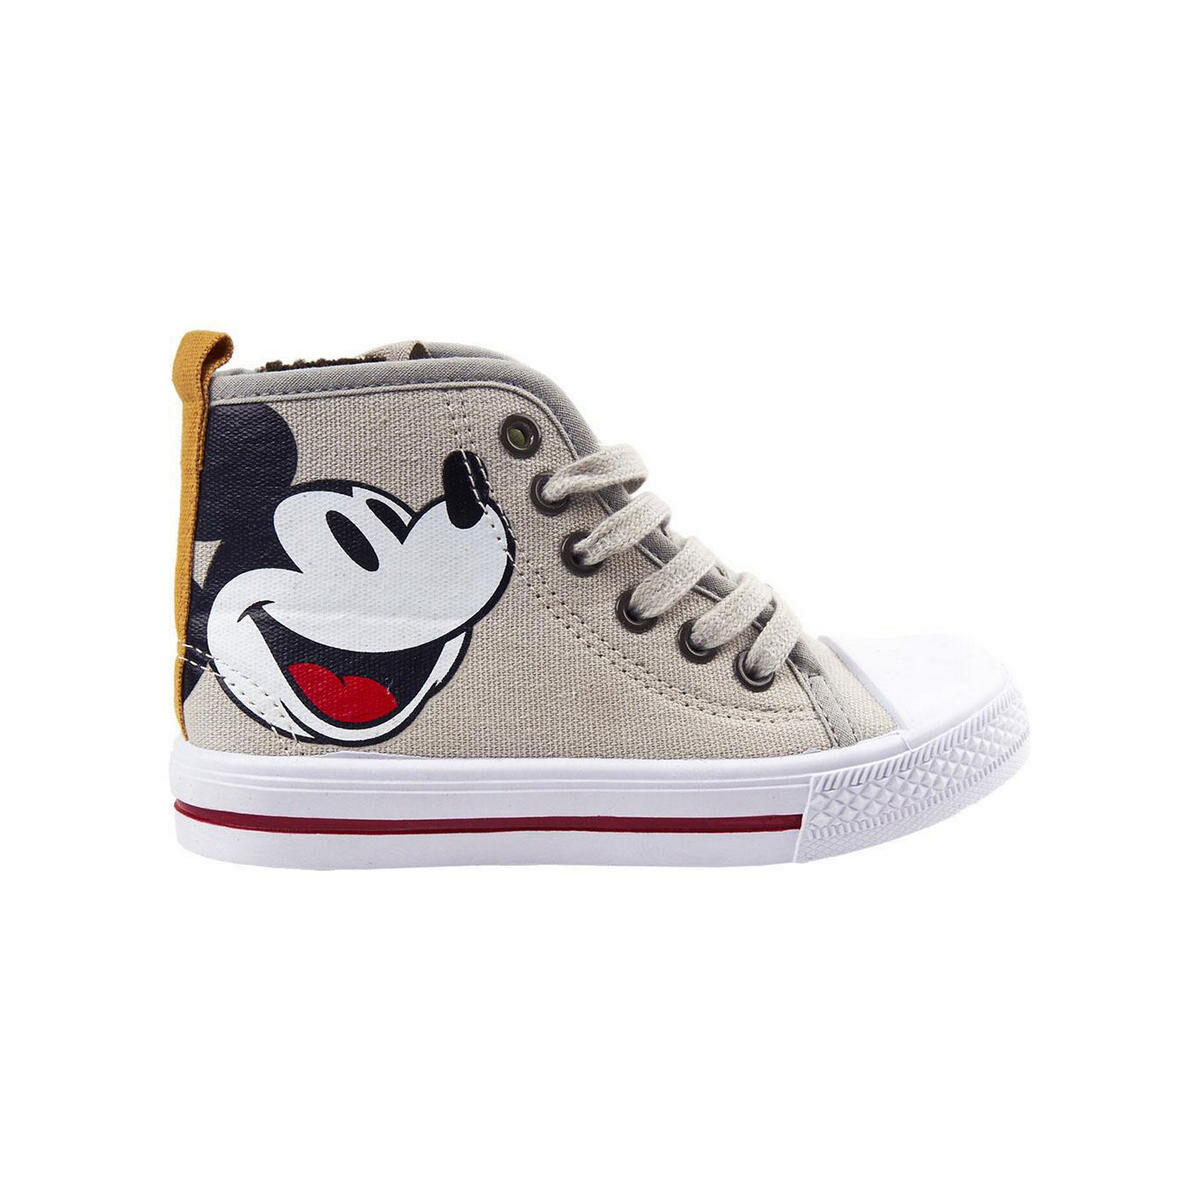 Chaussures casual enfant Mickey Mouse Beige